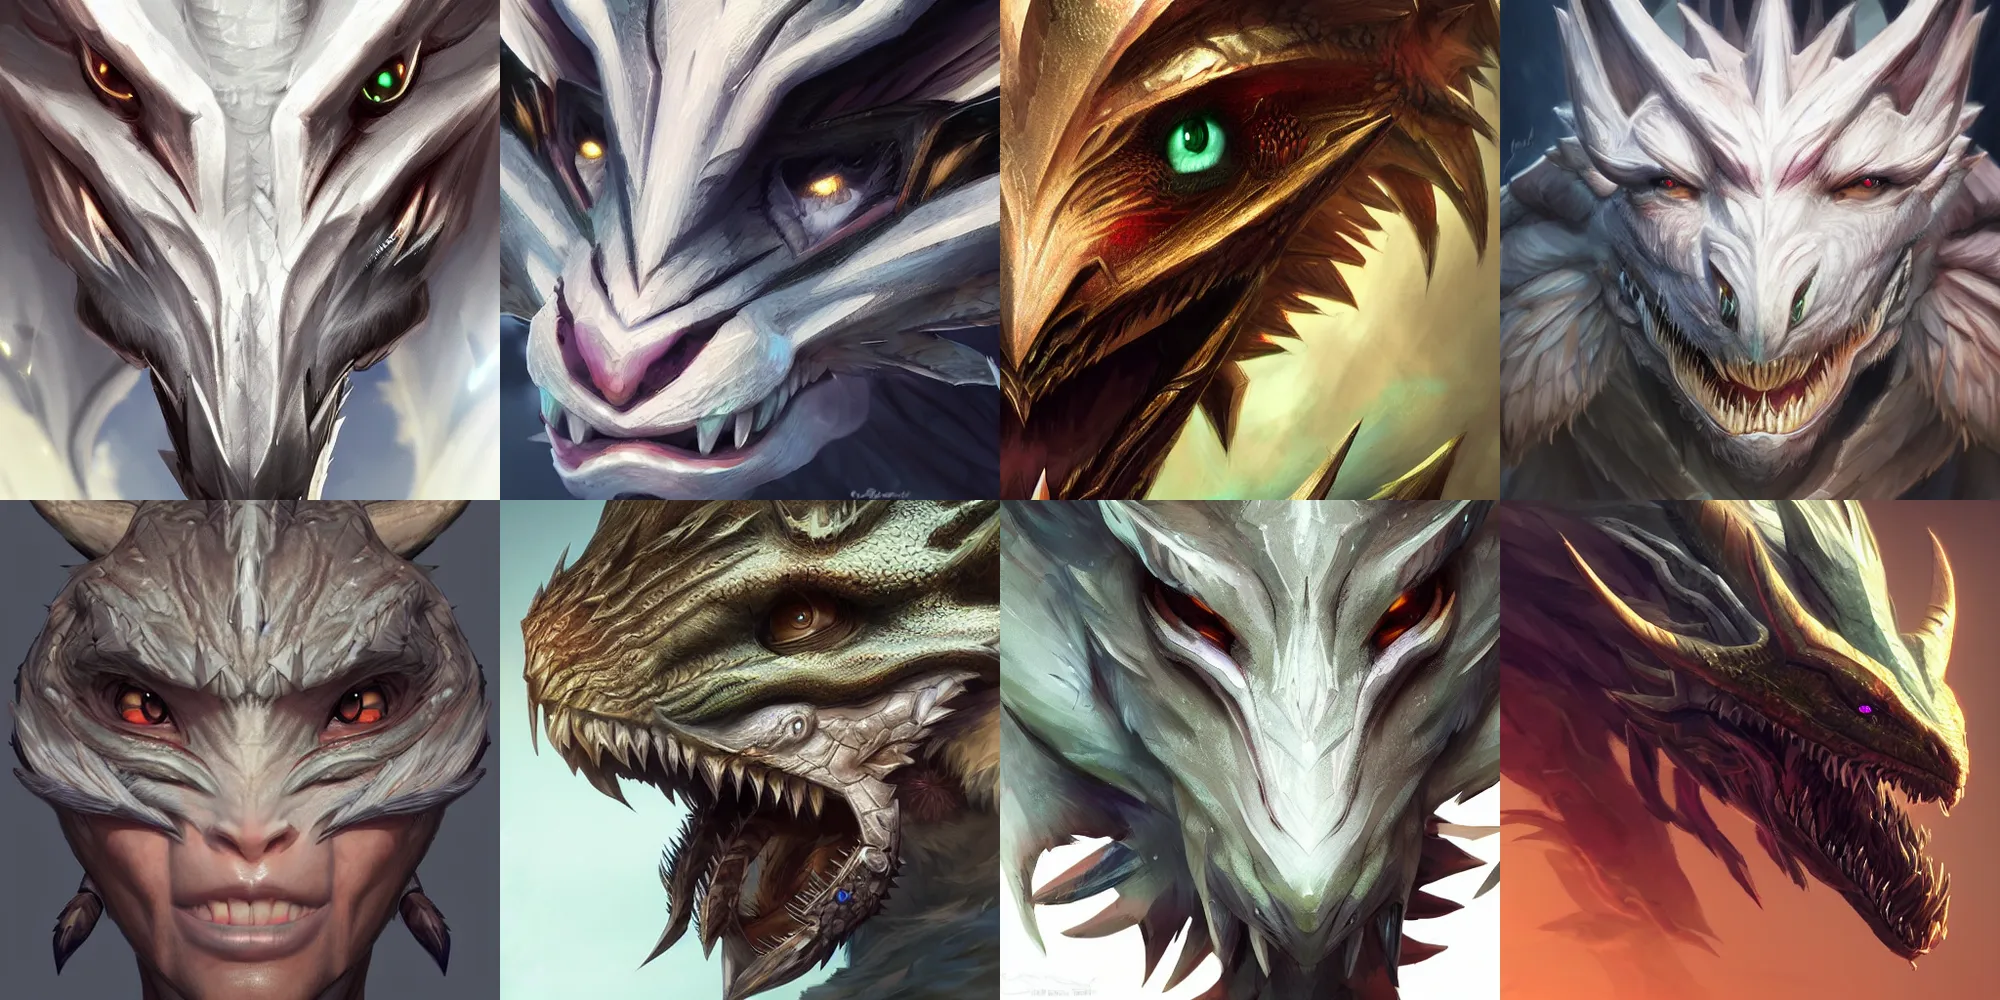 Prompt: close up headshot extremely detailed Concept, 3d Dragon concept artwork character design by Charlie bowater, in the style of League of legends, ARK survival, Skyrim HD, Breath of the wild, high detail, detailed feathers, textures, scales and fur, 3d render